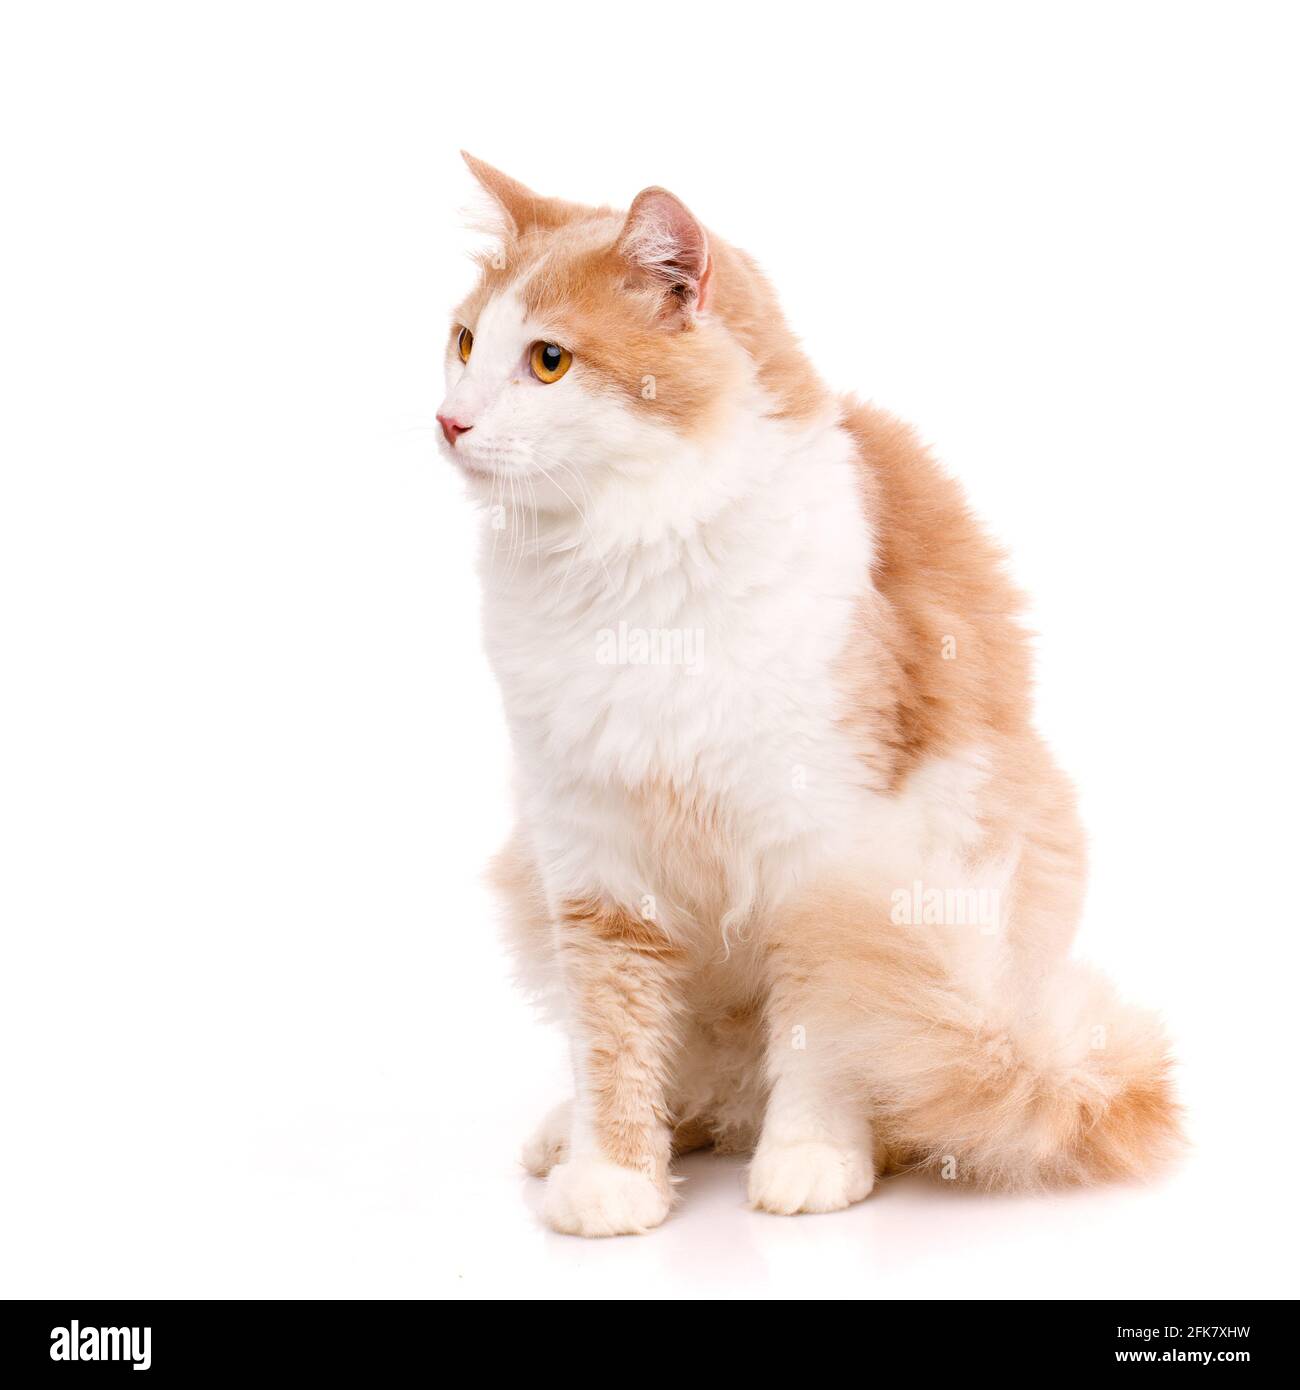 Close up of a big domestic cat with light fur and yellow eyes on a white background and looking to the side. Adorable domestic pets. Stock Photo